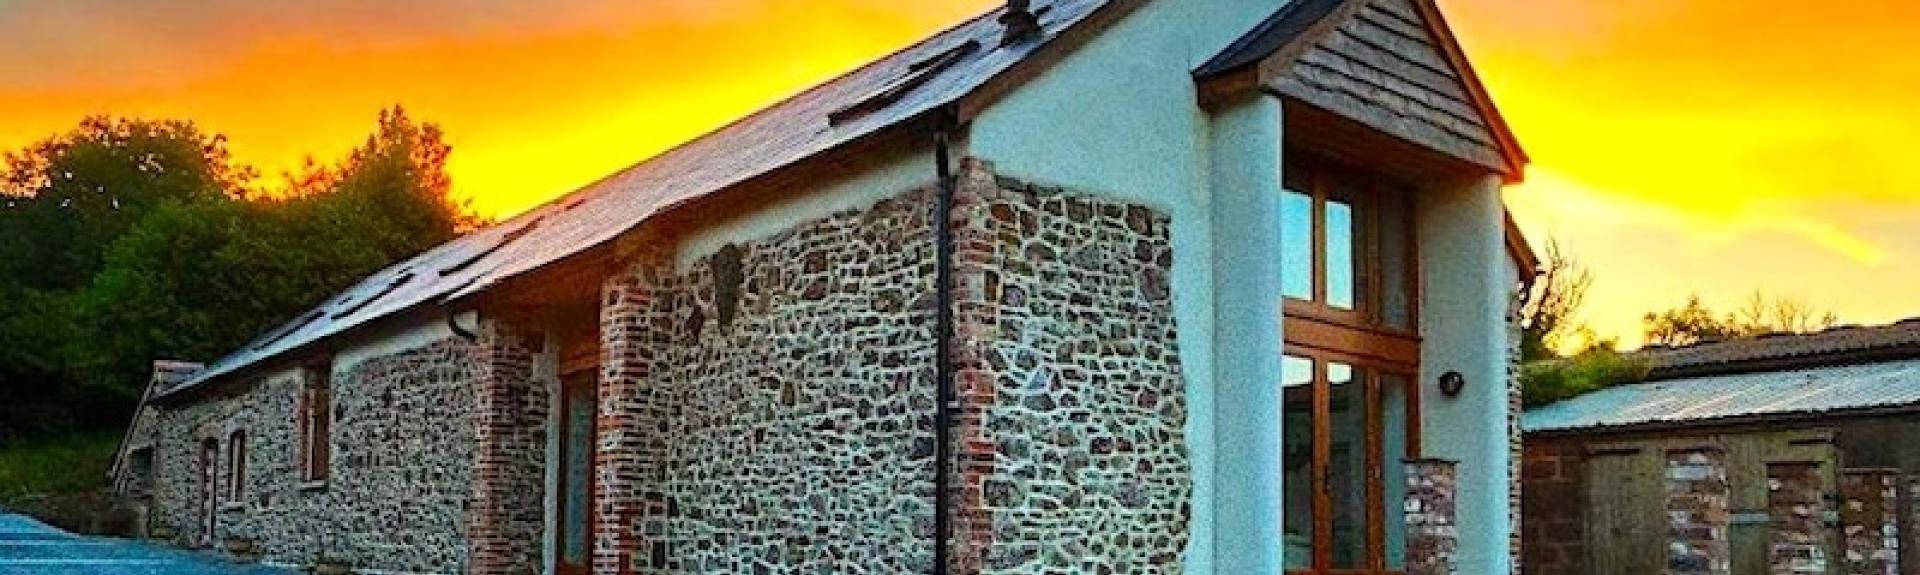 A stone-built Exmoor barn conversion at sunset.